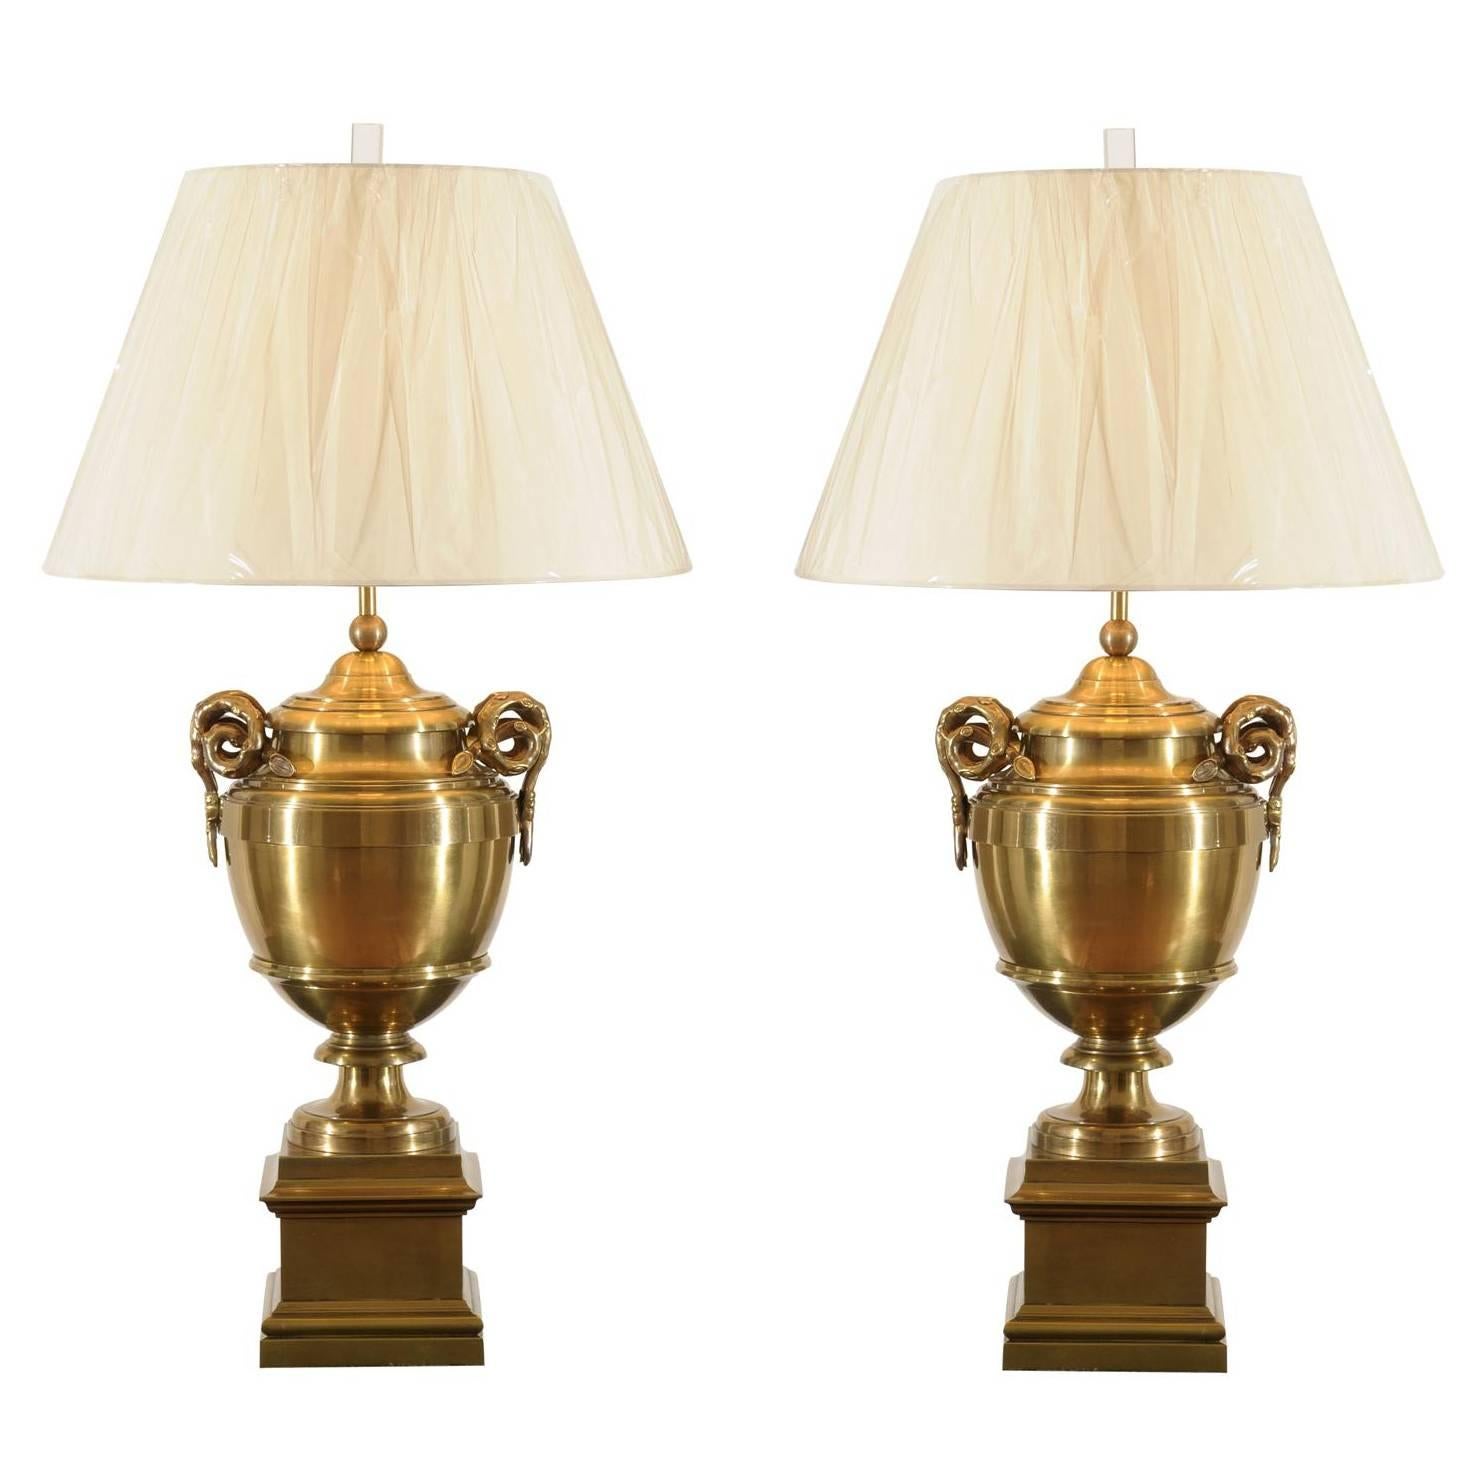 Exquisite Pair of Brass Urn Lamps in the Style of Maison Jansen